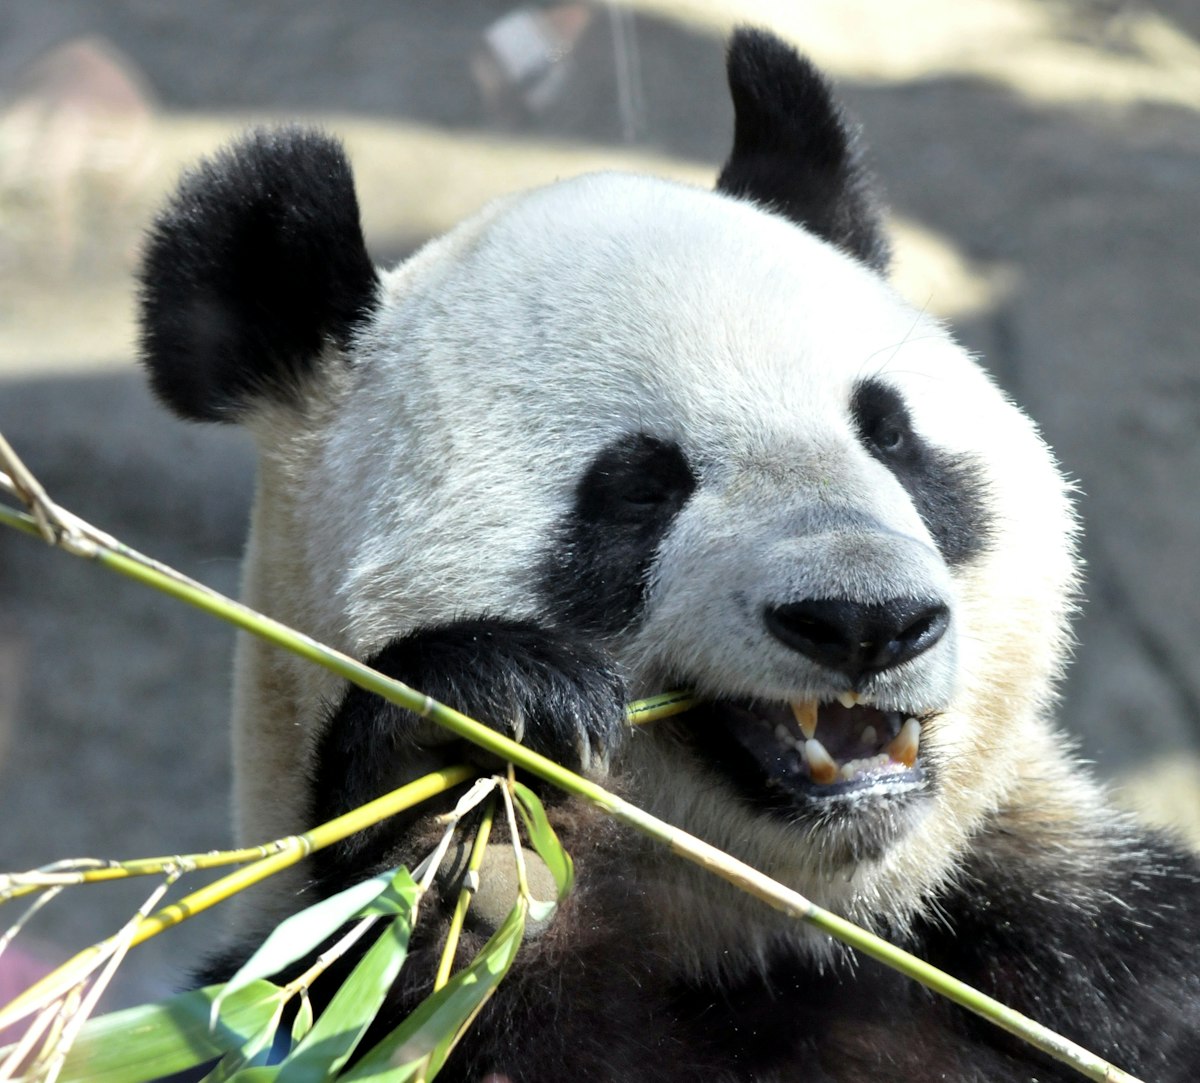 A giant female panda Shin Shin eats bamboo at Tokyo's Ueno Zoo on April 1, 2011. A pair of pandas, leased from China, arrived at Ueno Zoo on February 21, and are now displayed to the public after the zoo closed following the March 11 earthquake and tsunami disaster. AFP PHOTO / Yoshikazu TSUNO/TOPSHOTS (Photo credit should read YOSHIKAZU TSUNO/AFP/Getty Images)